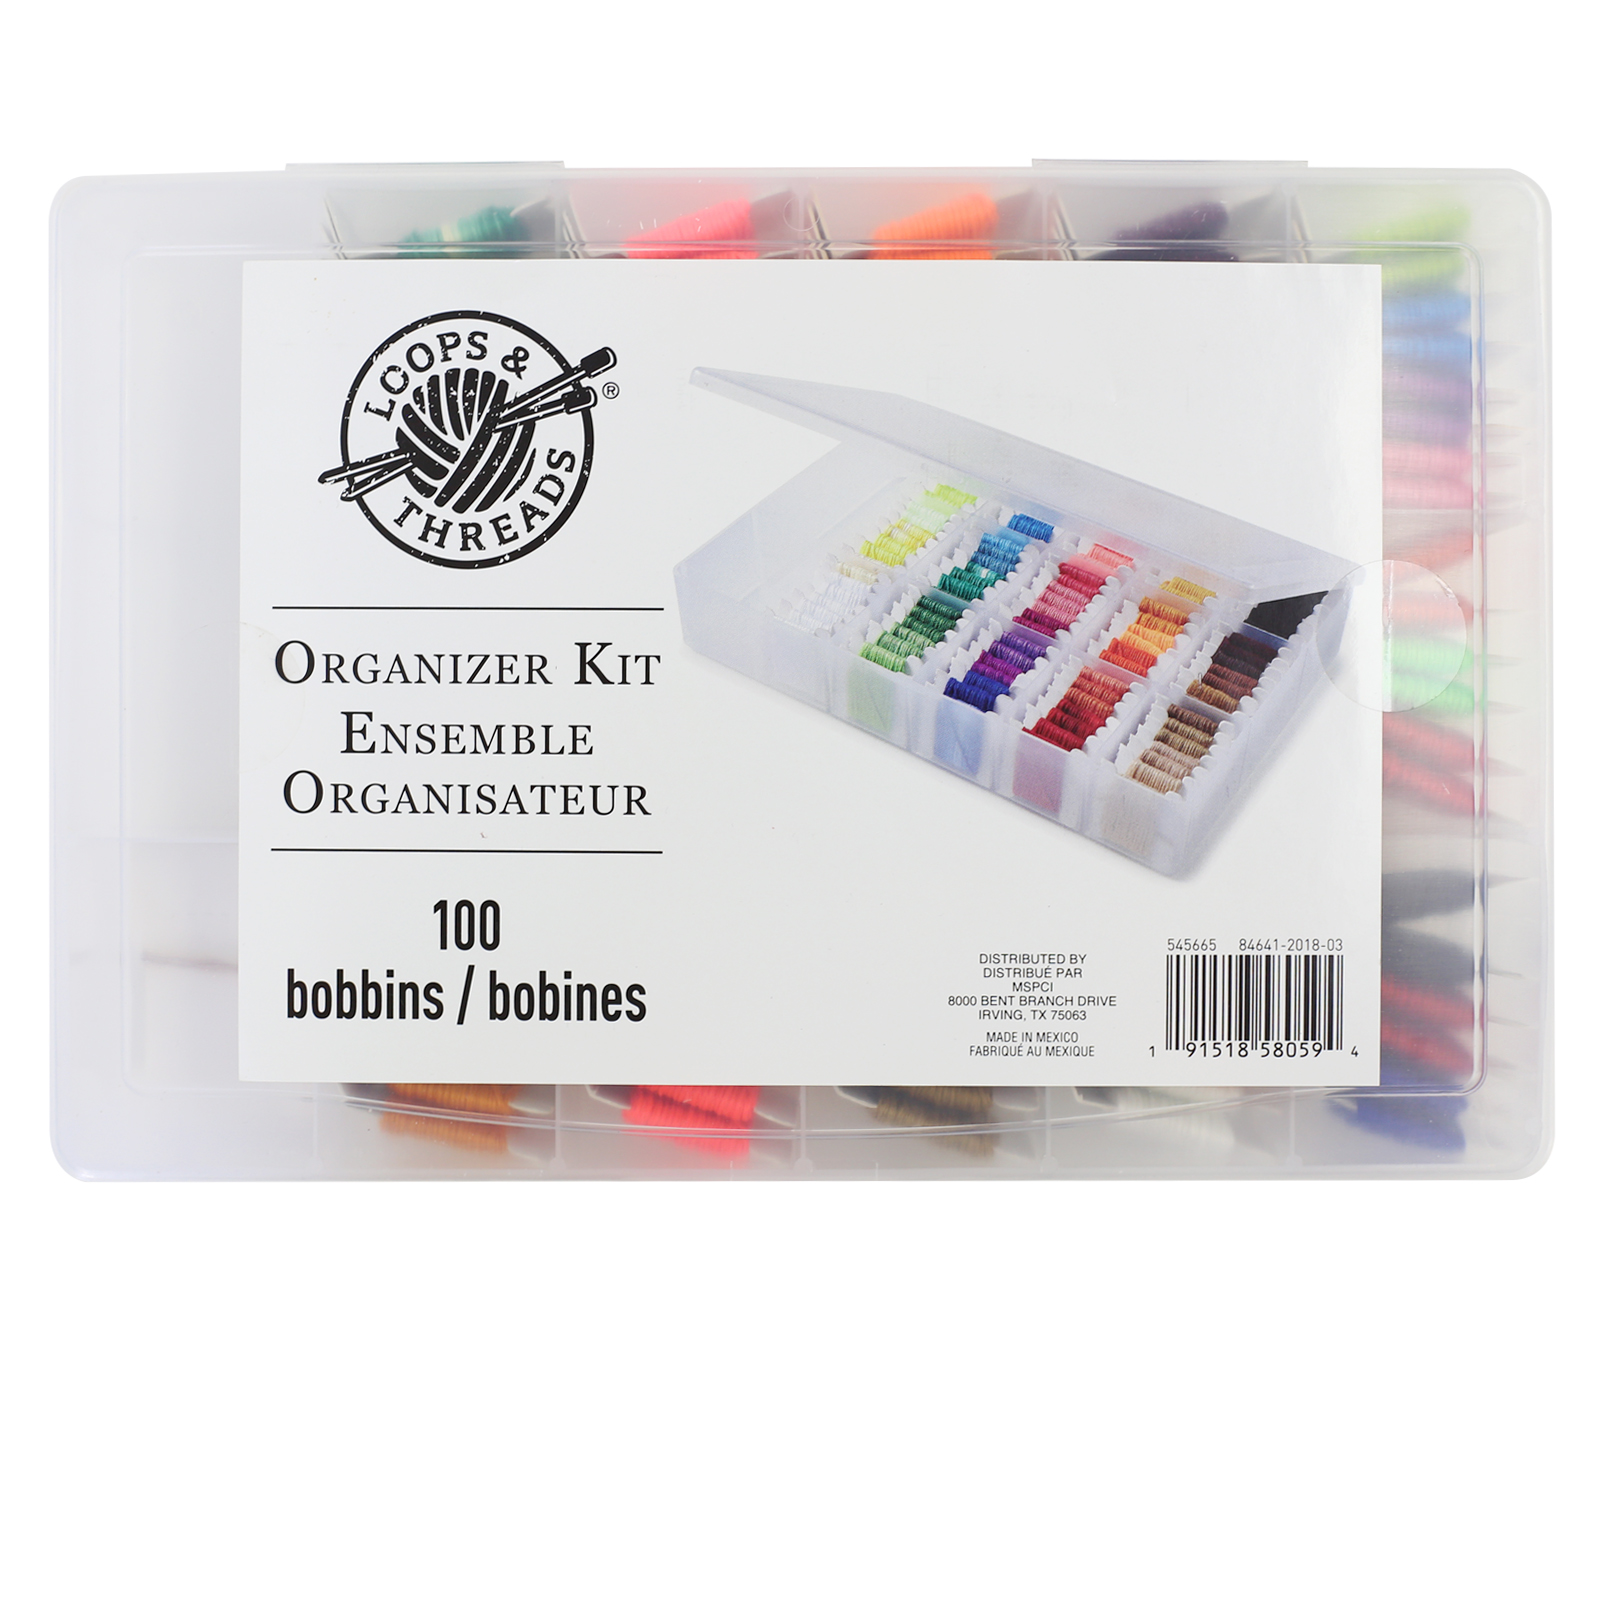 Embroidery Floss Organizer Kit By Loops & Threads®